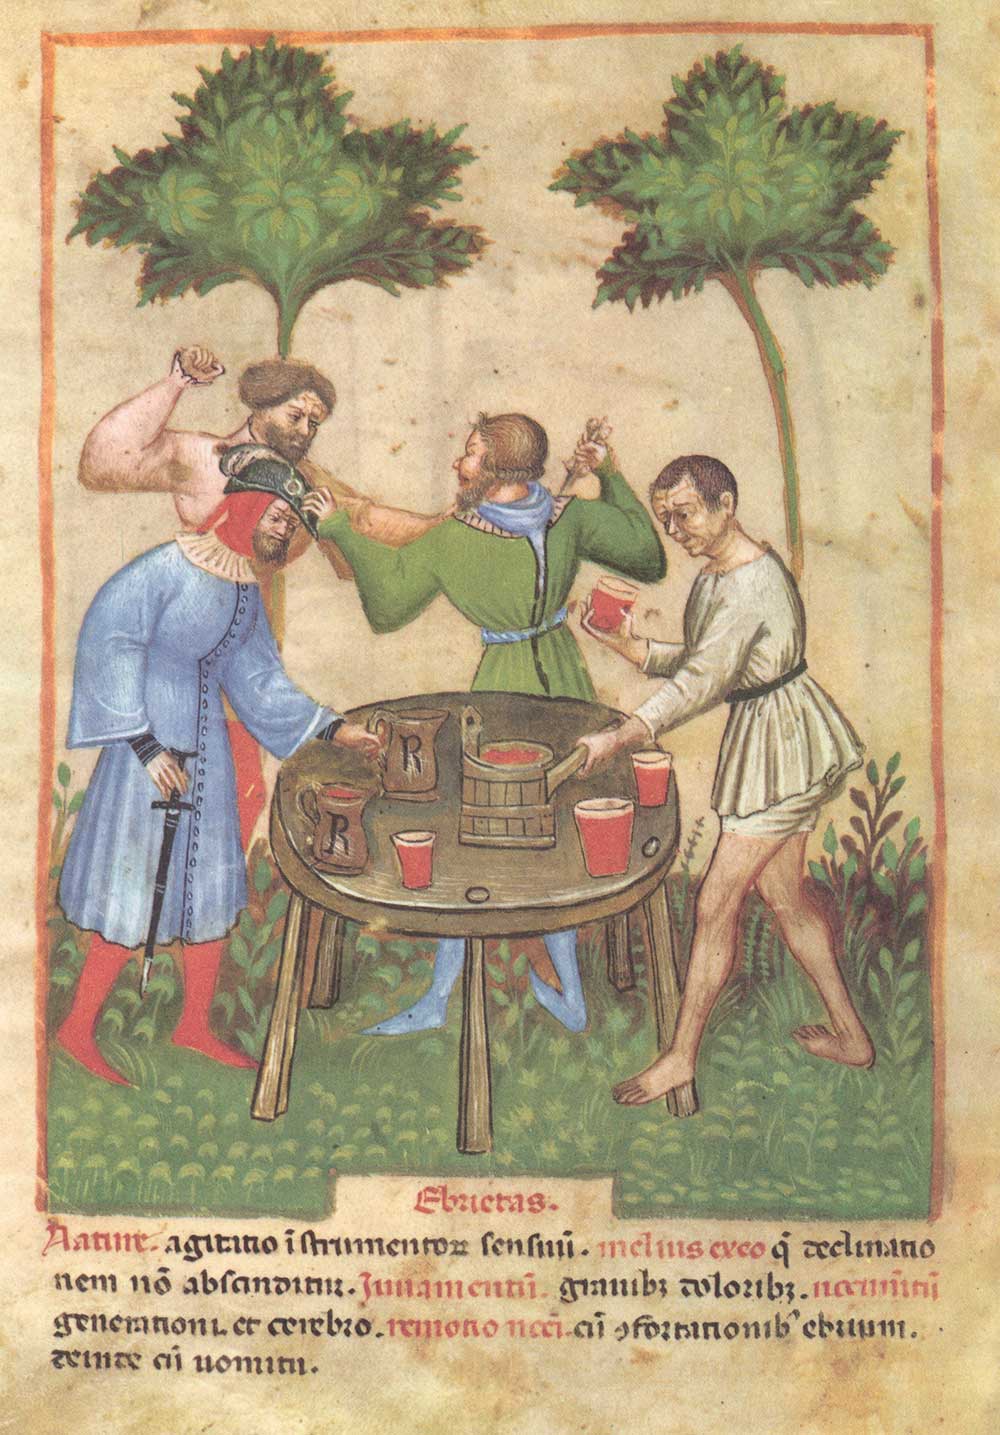 Drunkenness, an image from a European edition of Ibn Butlan’s Almanac of Health.